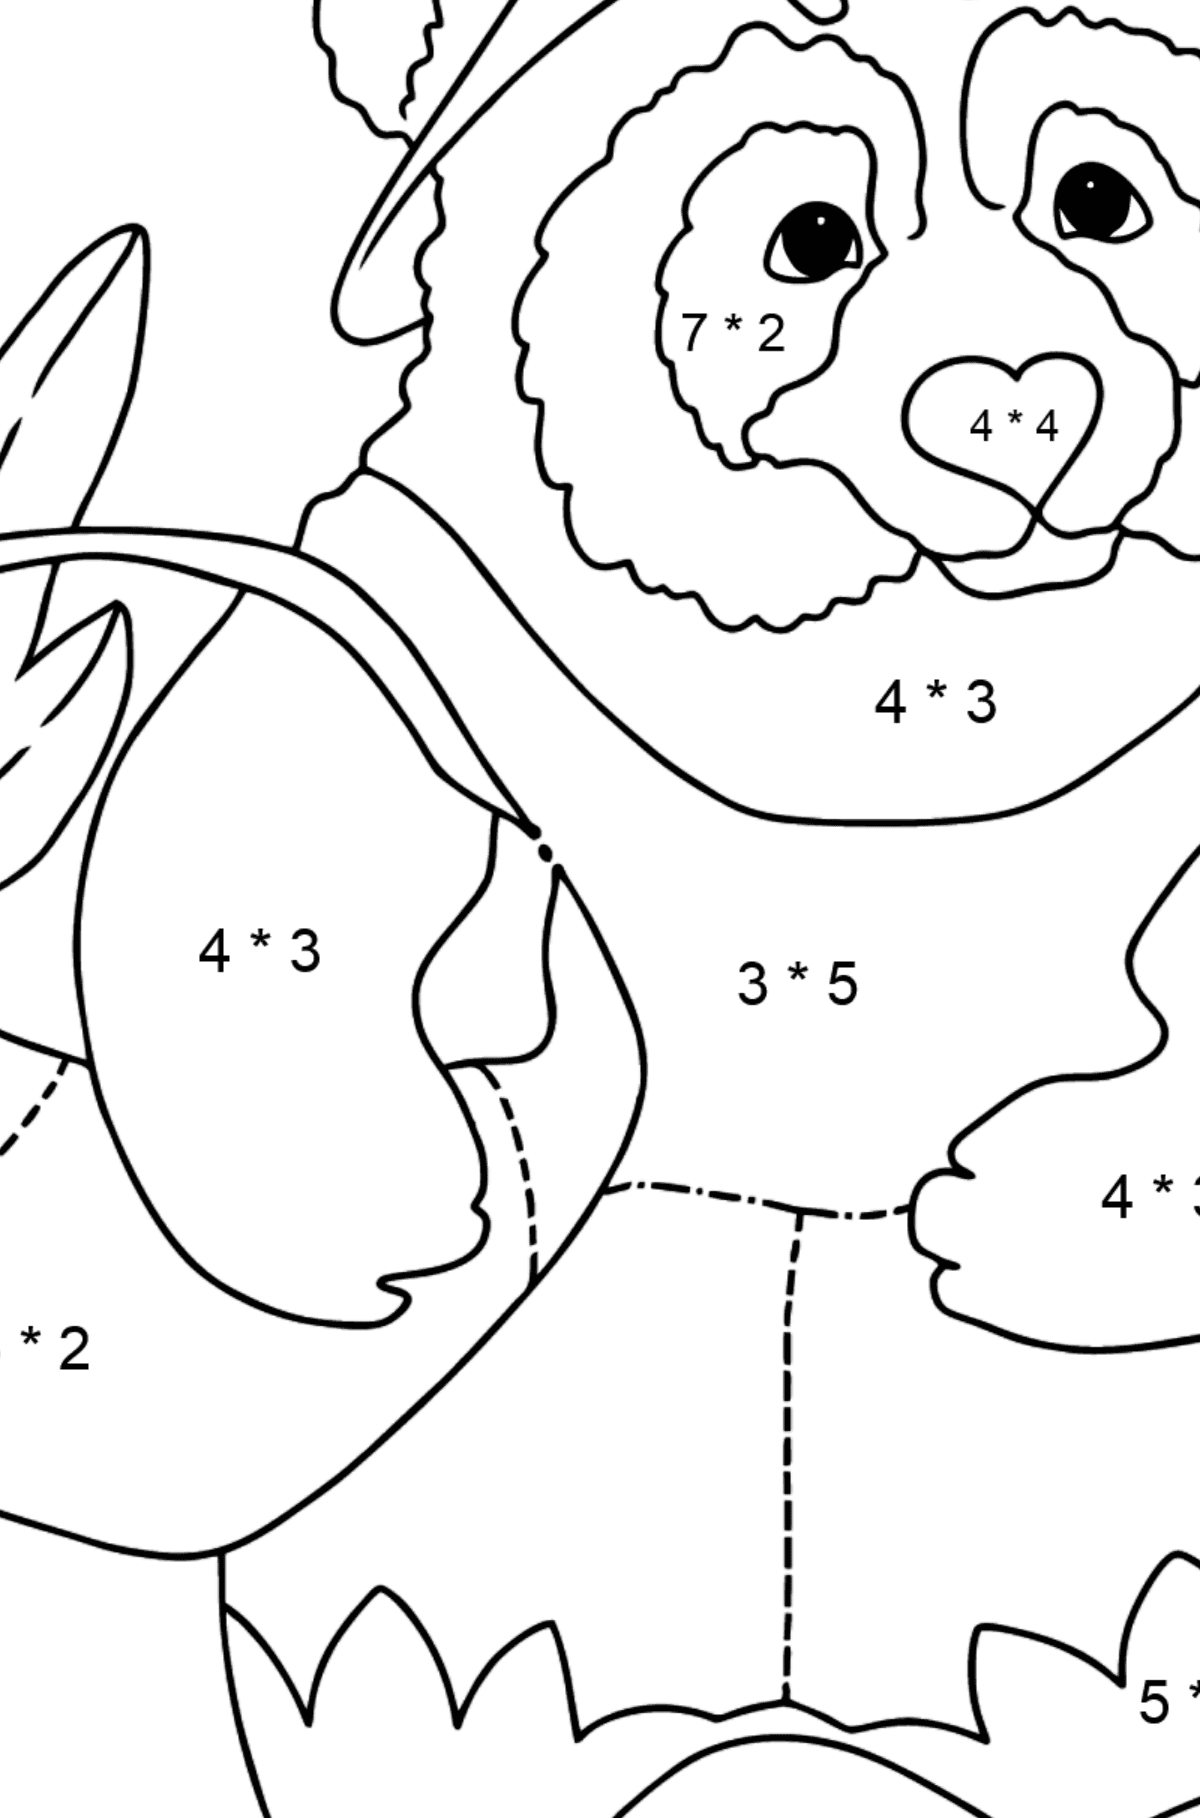 Good Panda (Simple) coloring page - Math Coloring - Multiplication for Kids